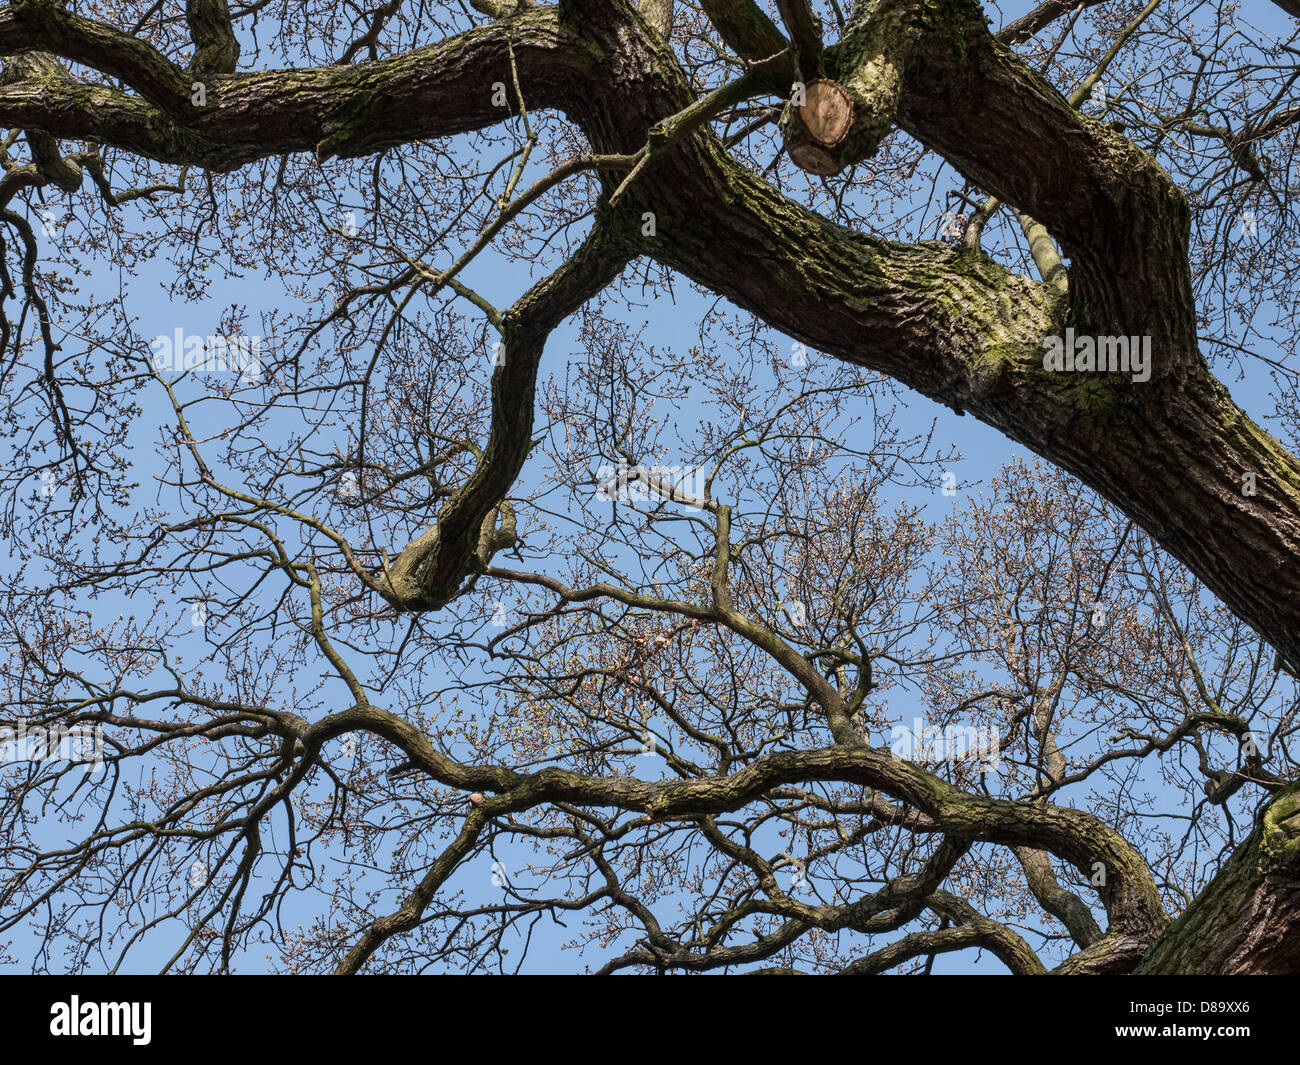 Looking up to silhouettes of tree branches with a background of blue sky Stock Photo